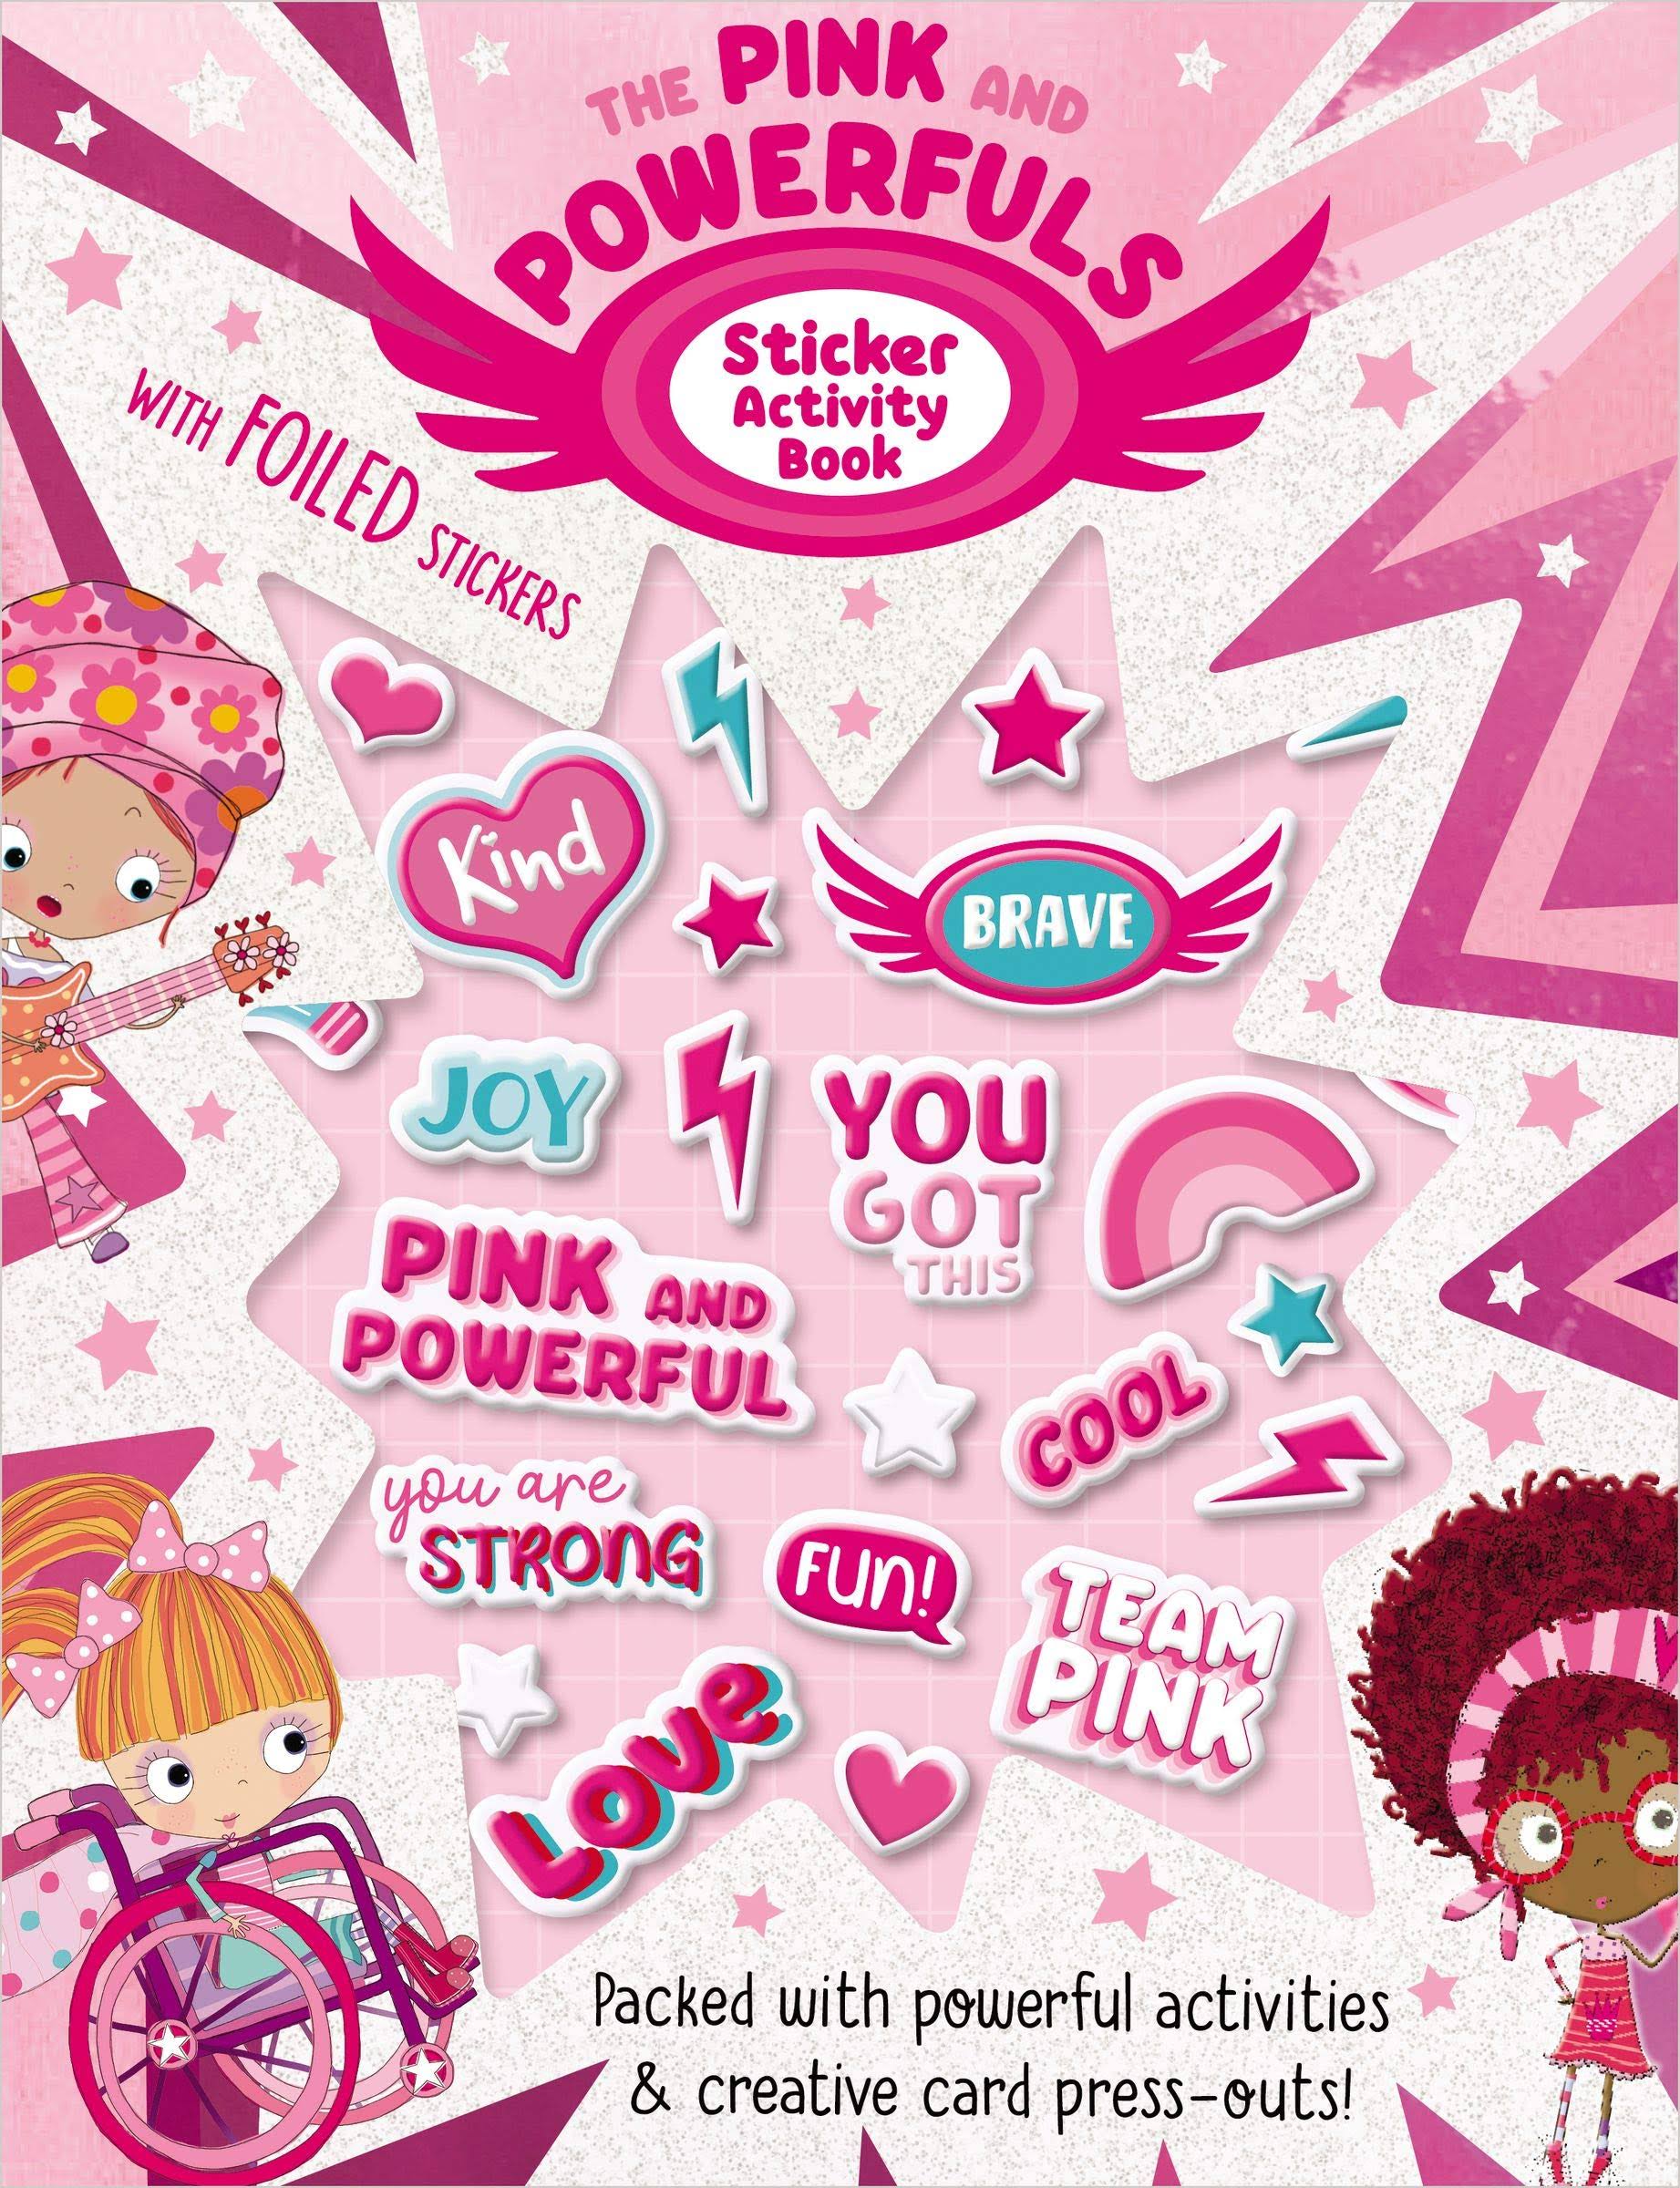 The Pink and Powerfuls Sticker Activity Book